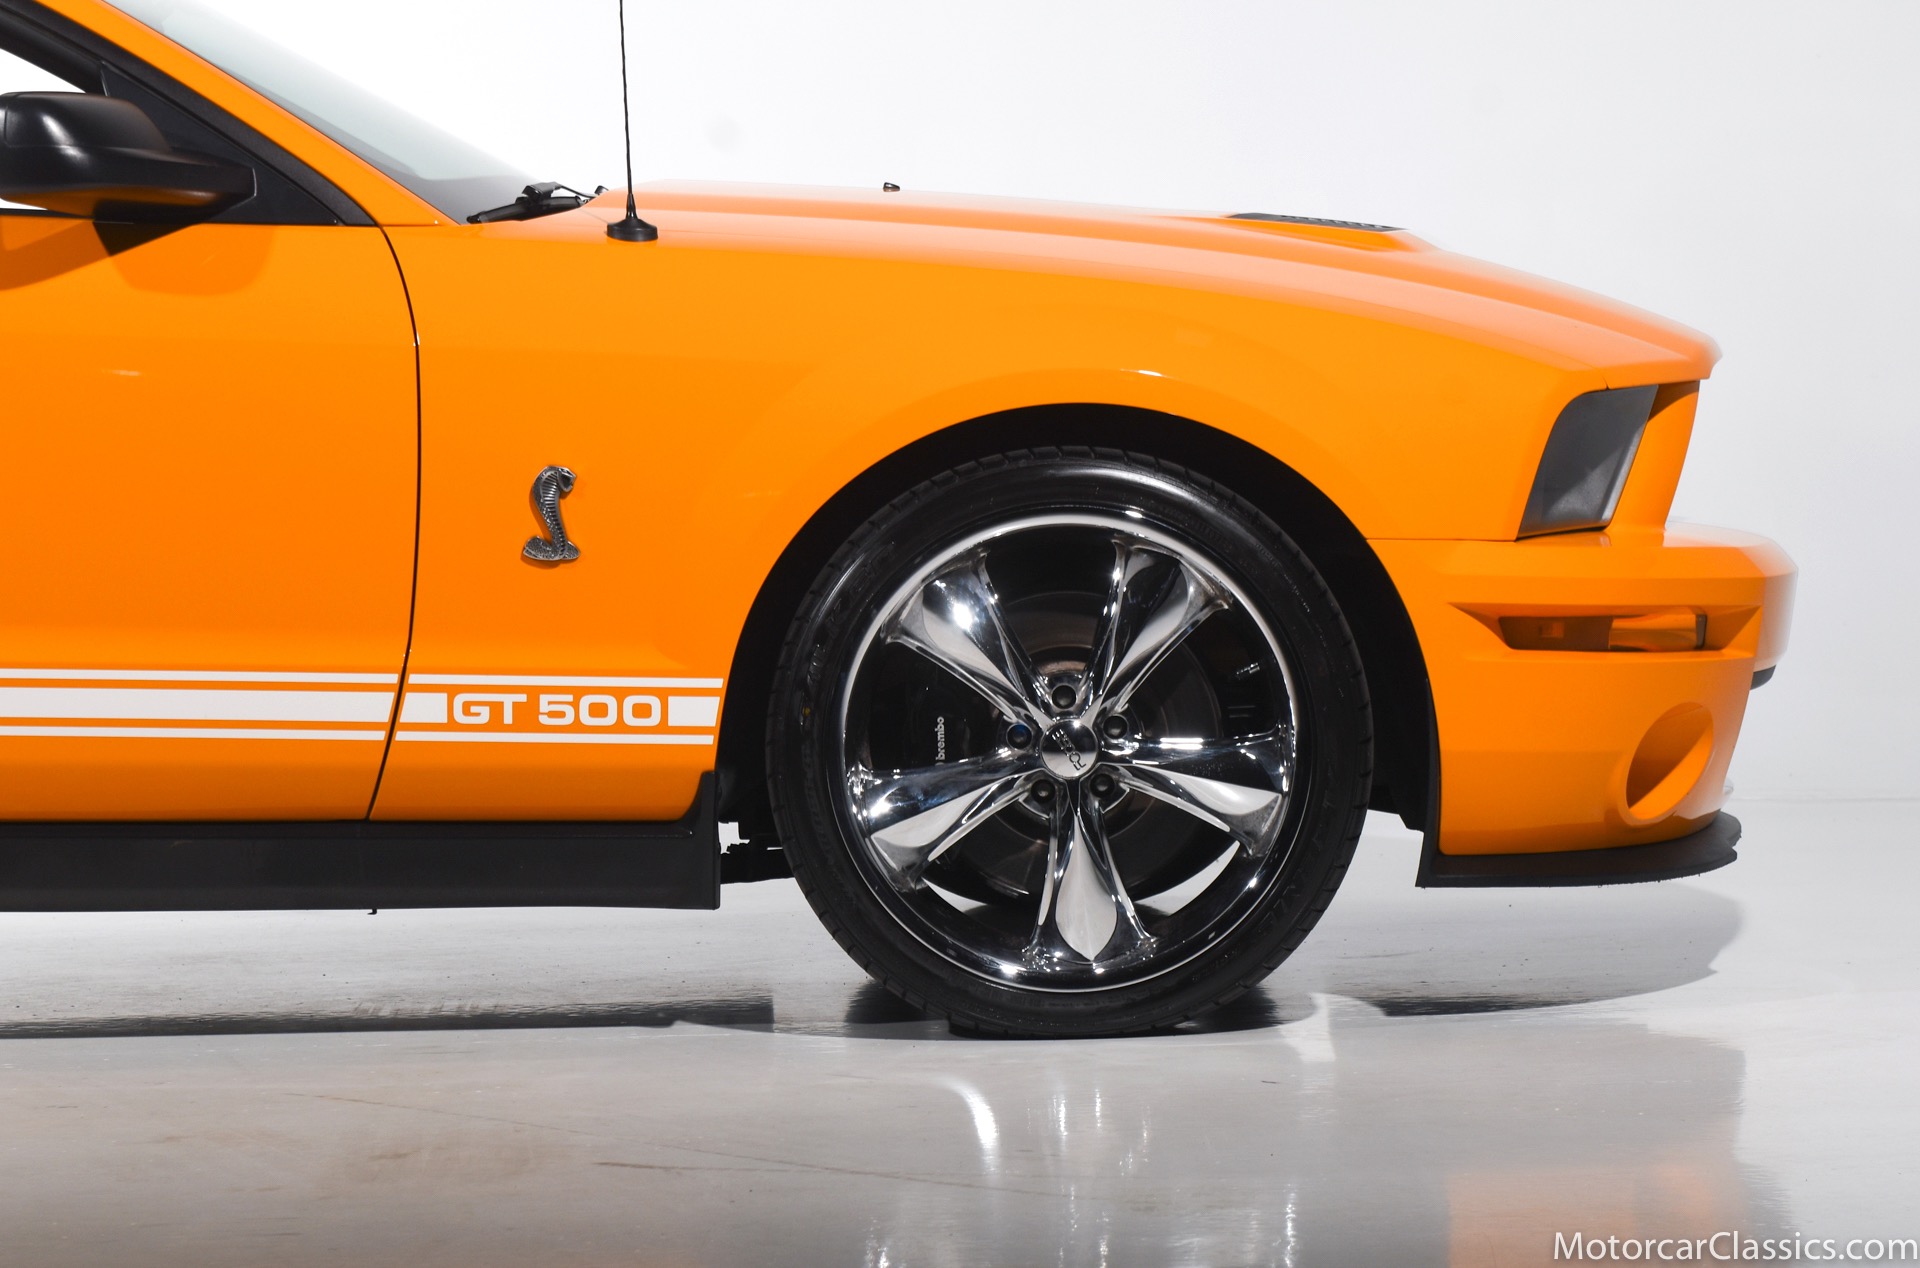 2007 Ford Shelby GT500 